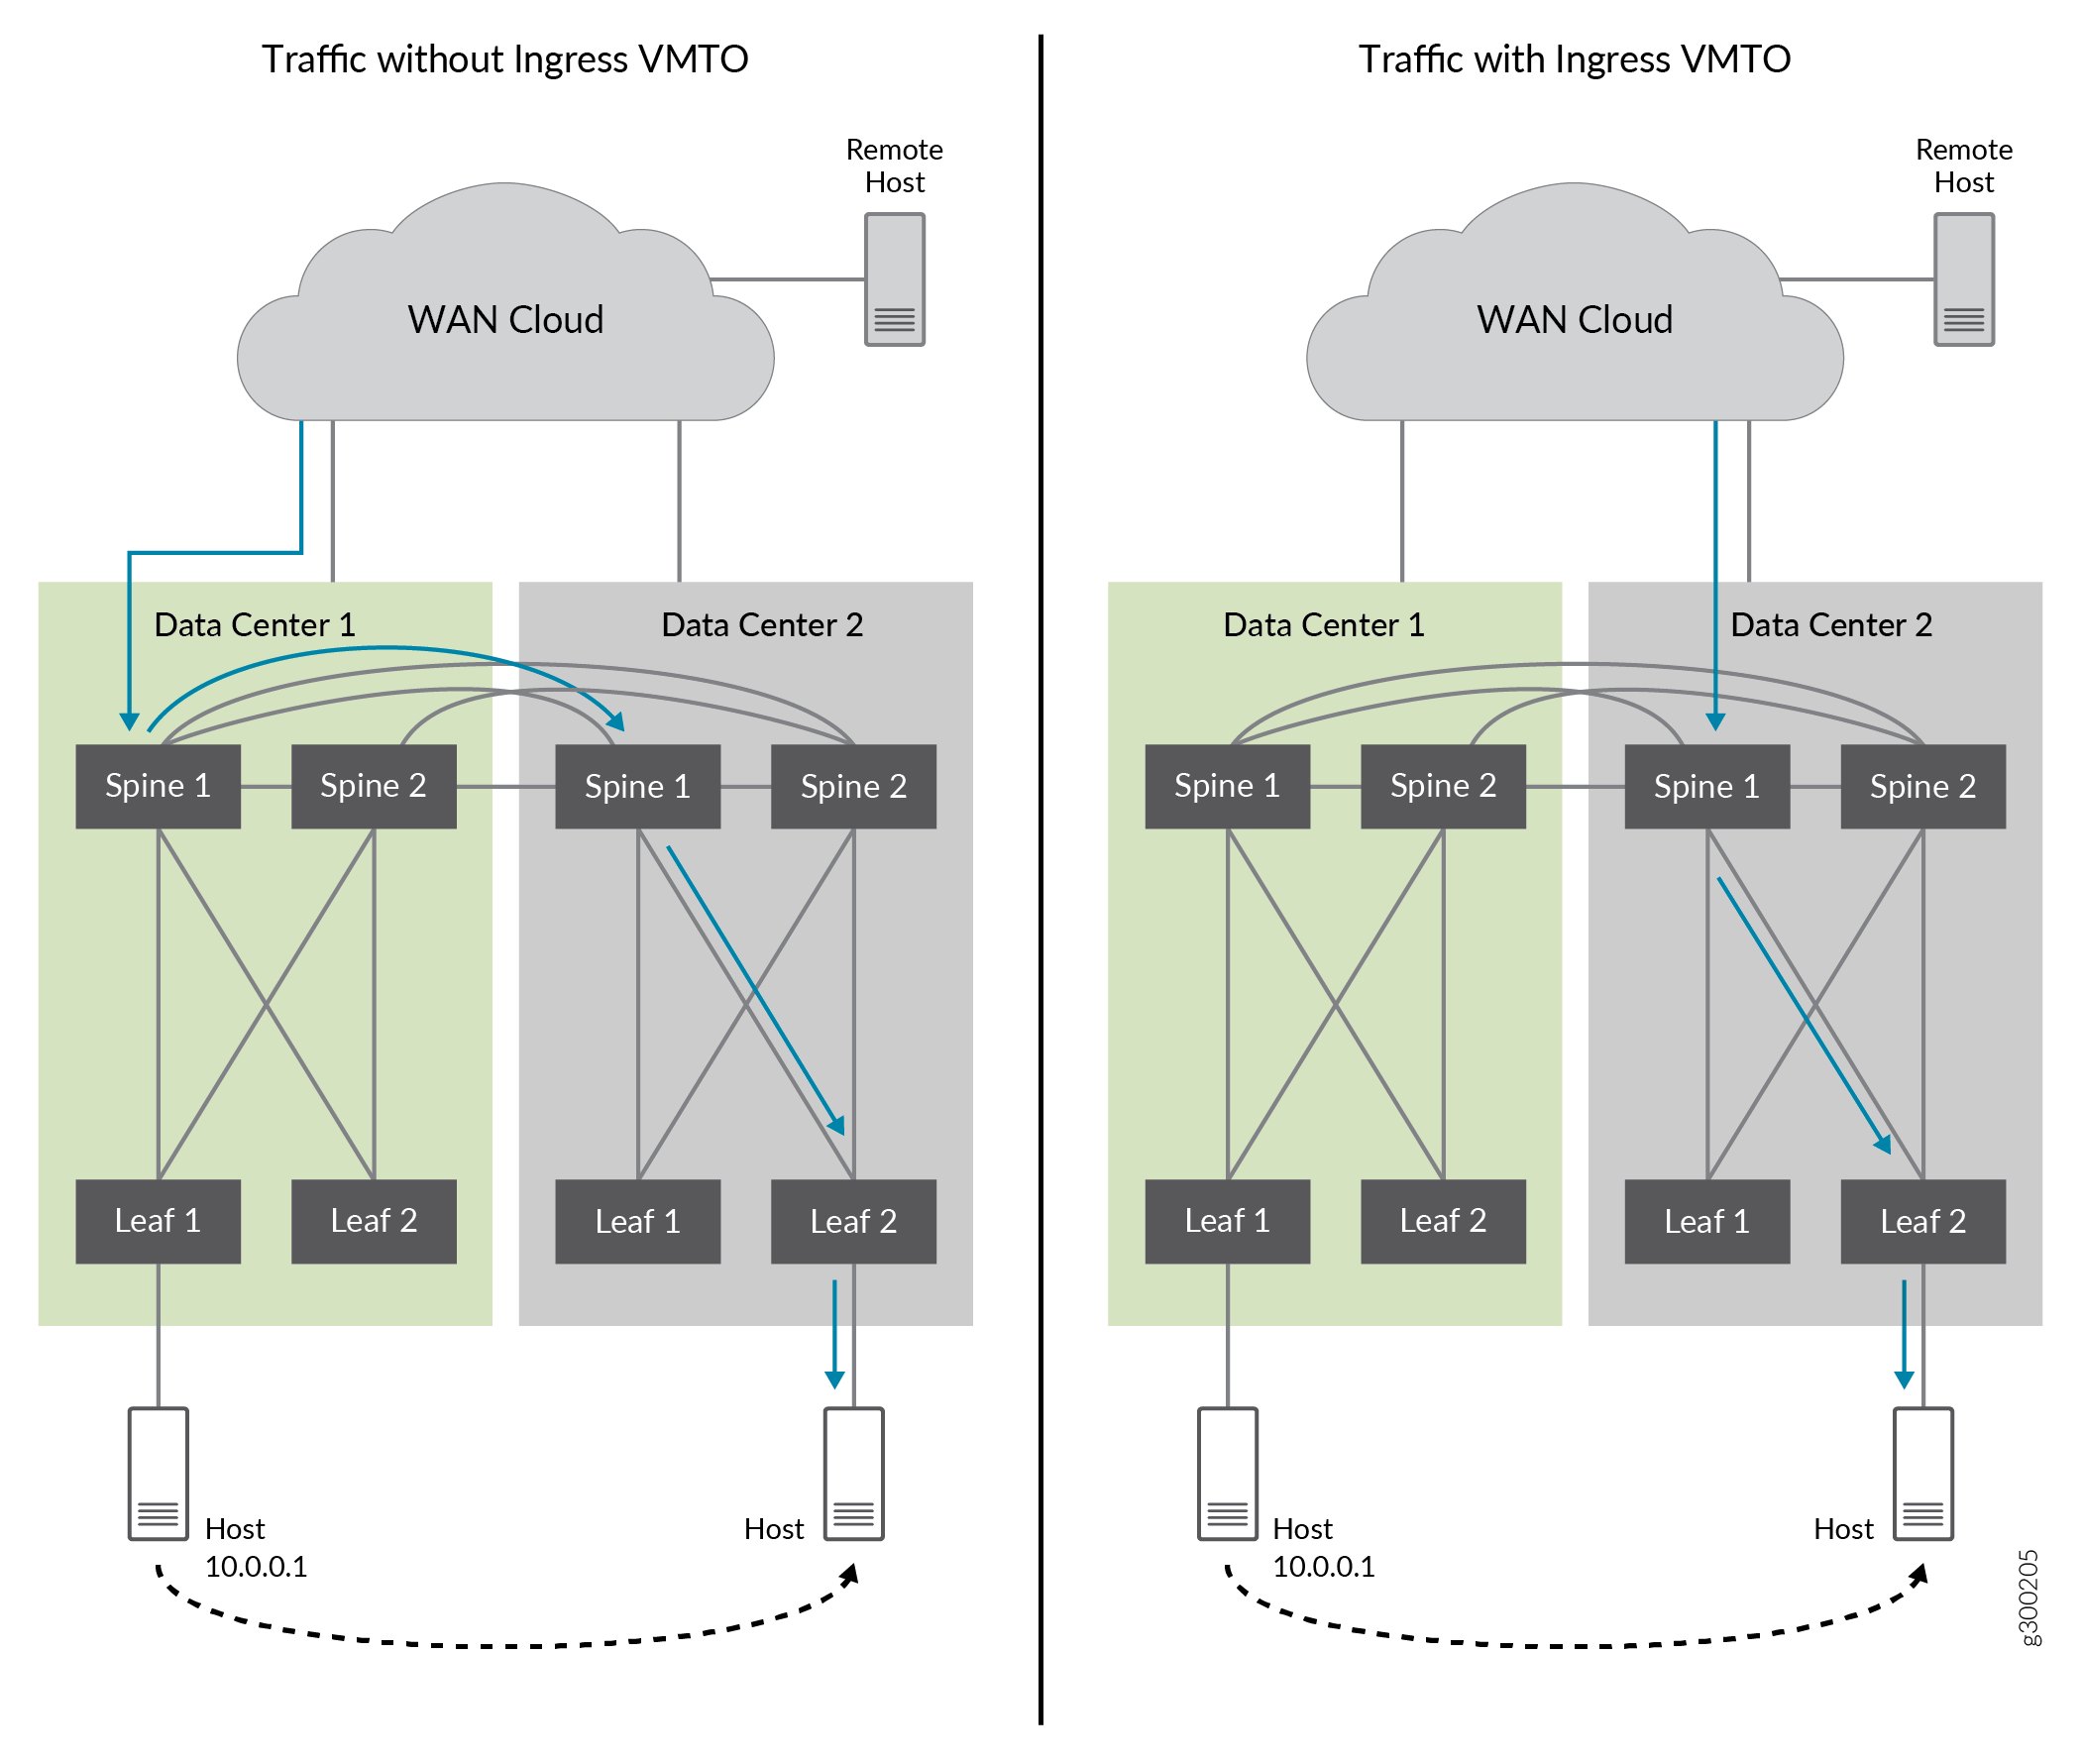 Traffic with and without Ingress VMTO